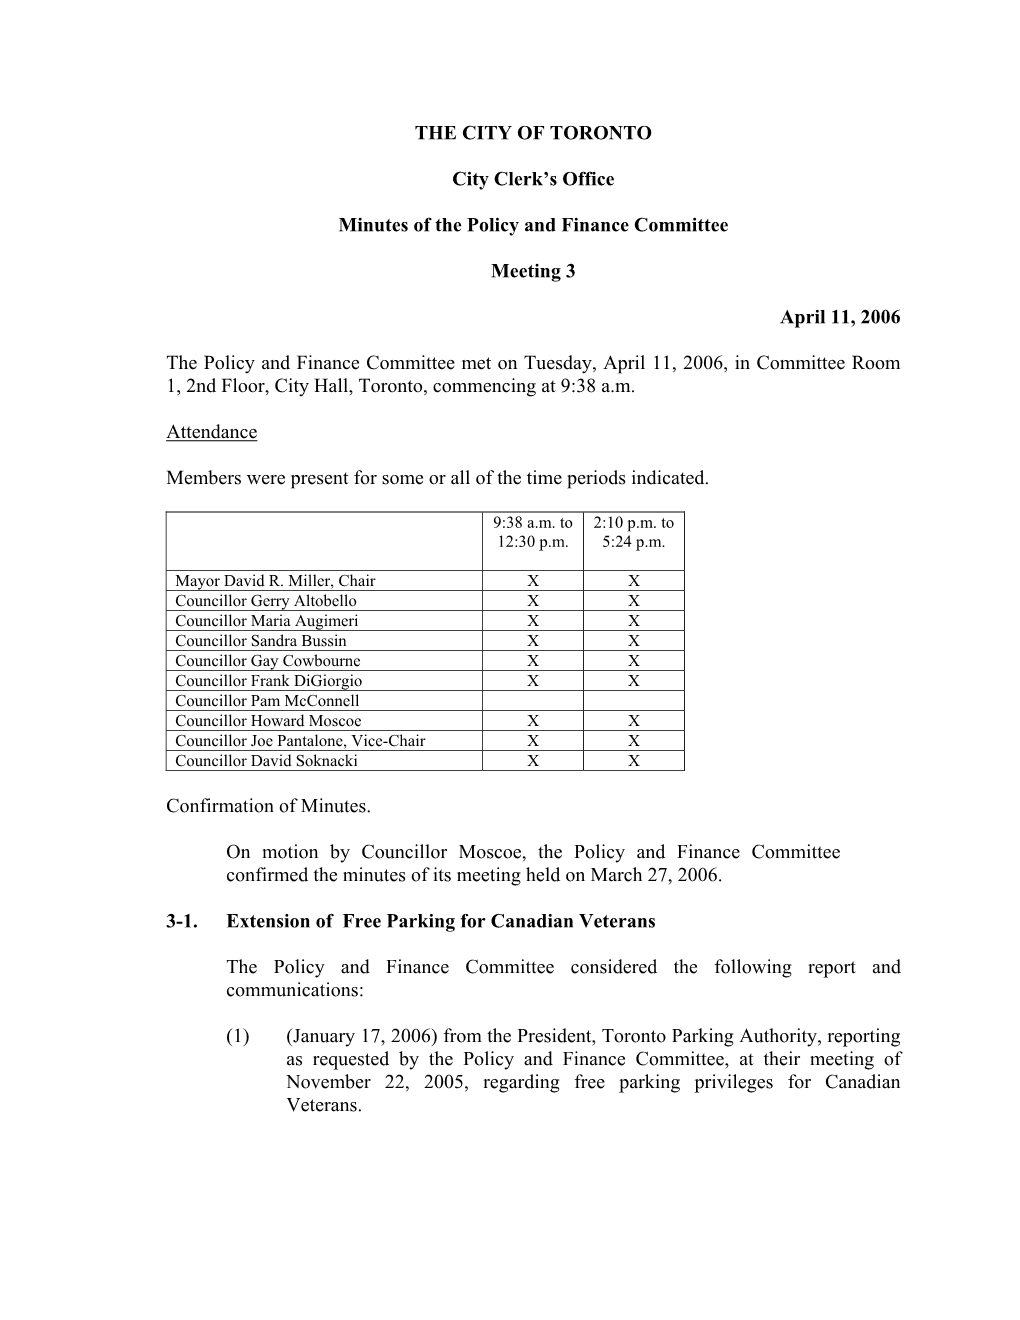 Minutes of the Policy and Finance Committee